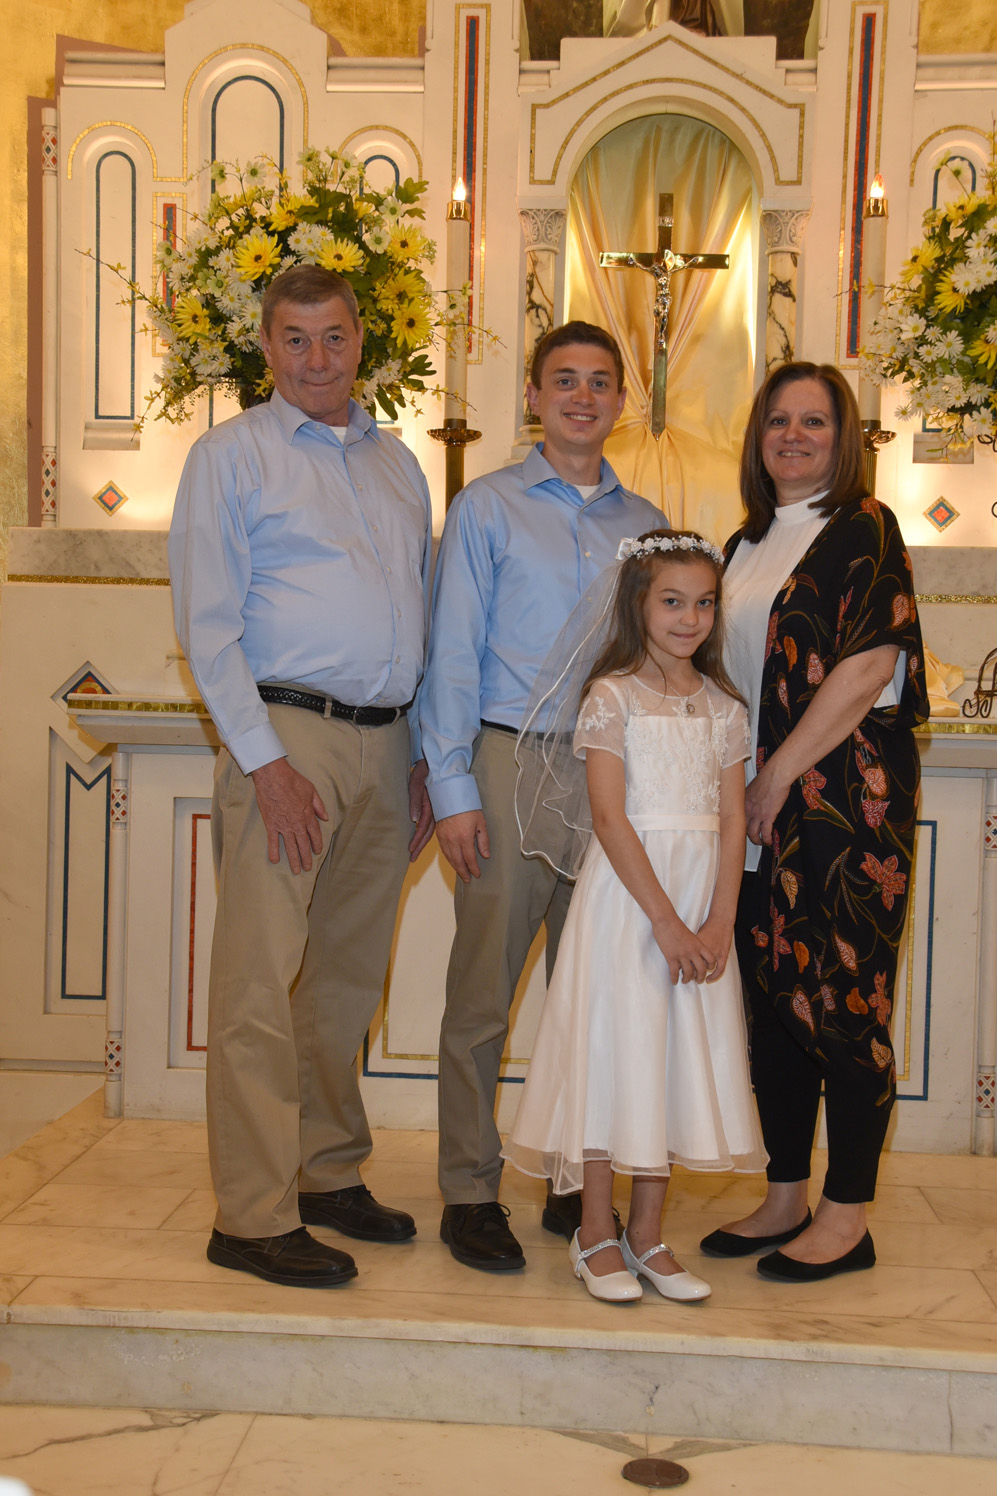 FIRST-COMMUNION-MAY-16-2021-157